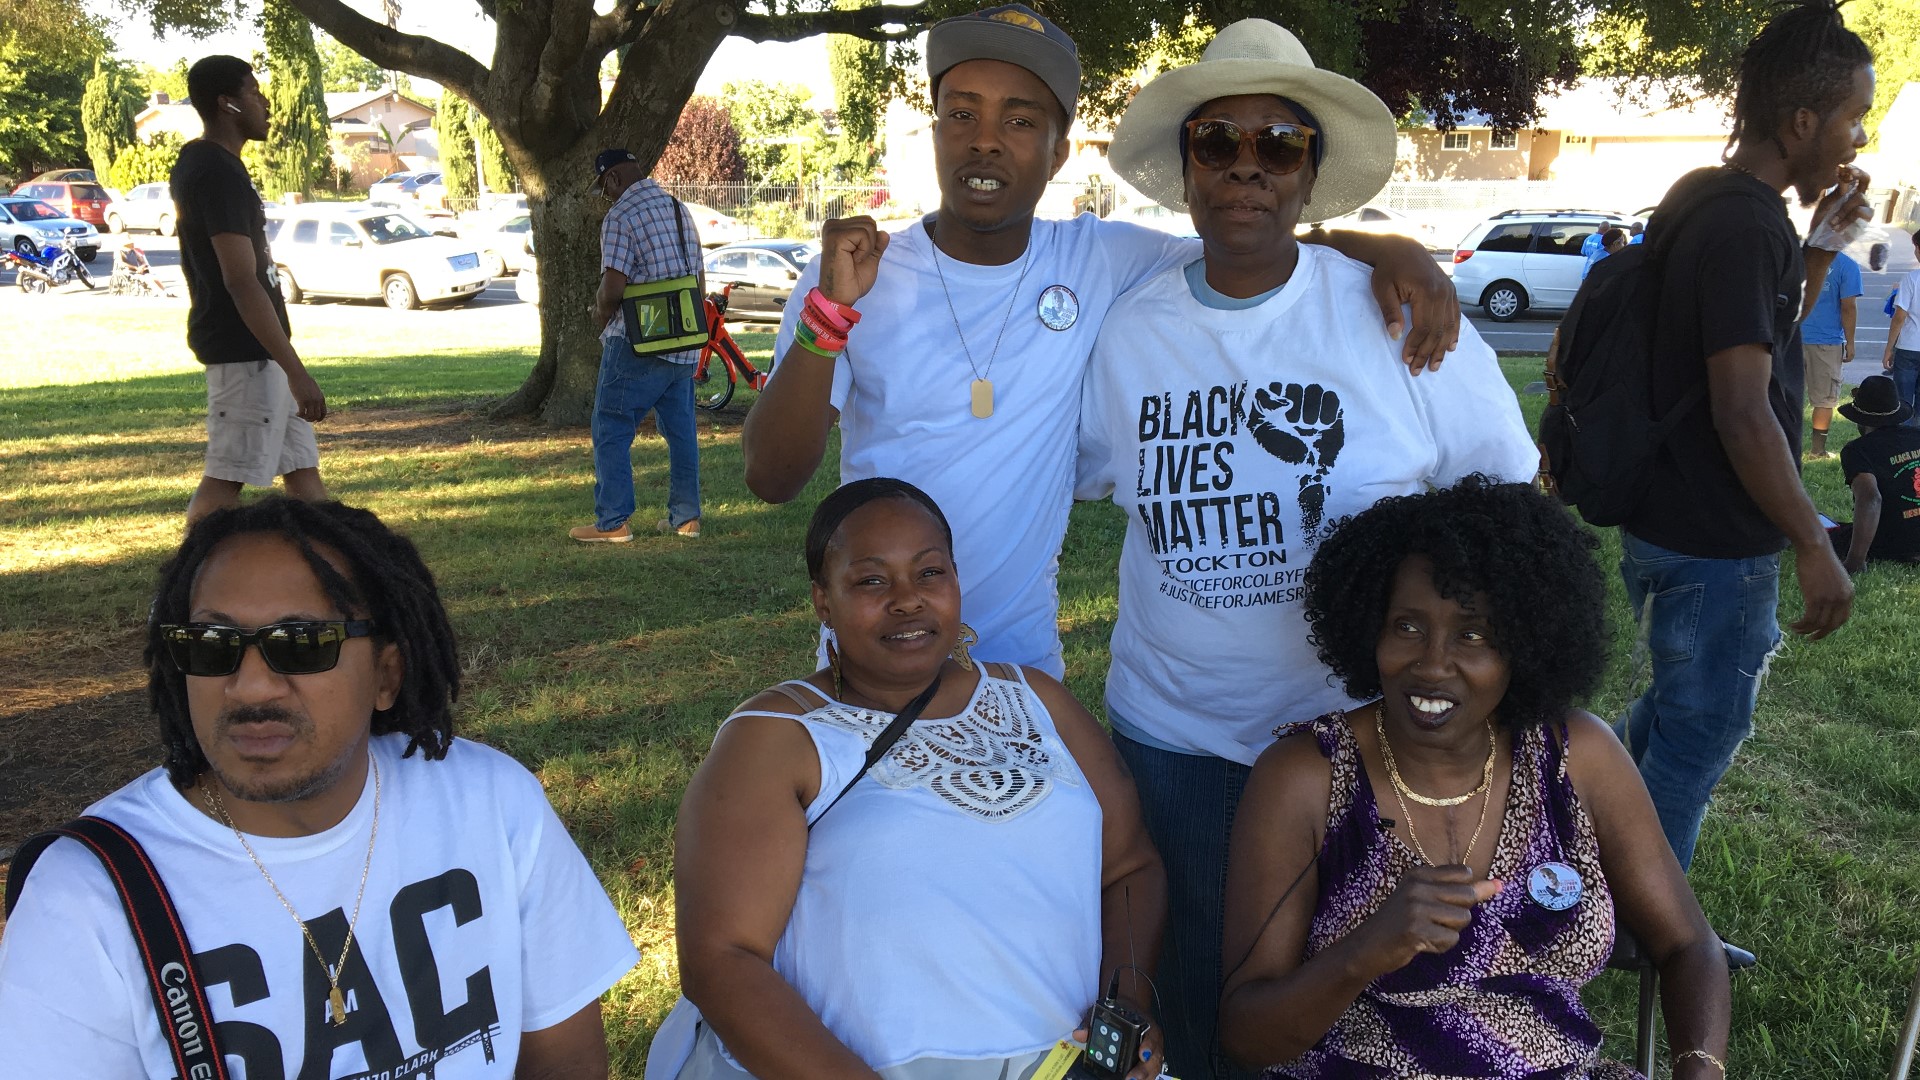 It's been 15 months since Stephon Clark was shot and killed by Sacramento Police officers. Clark's family members said they are still seeking justice for his death.